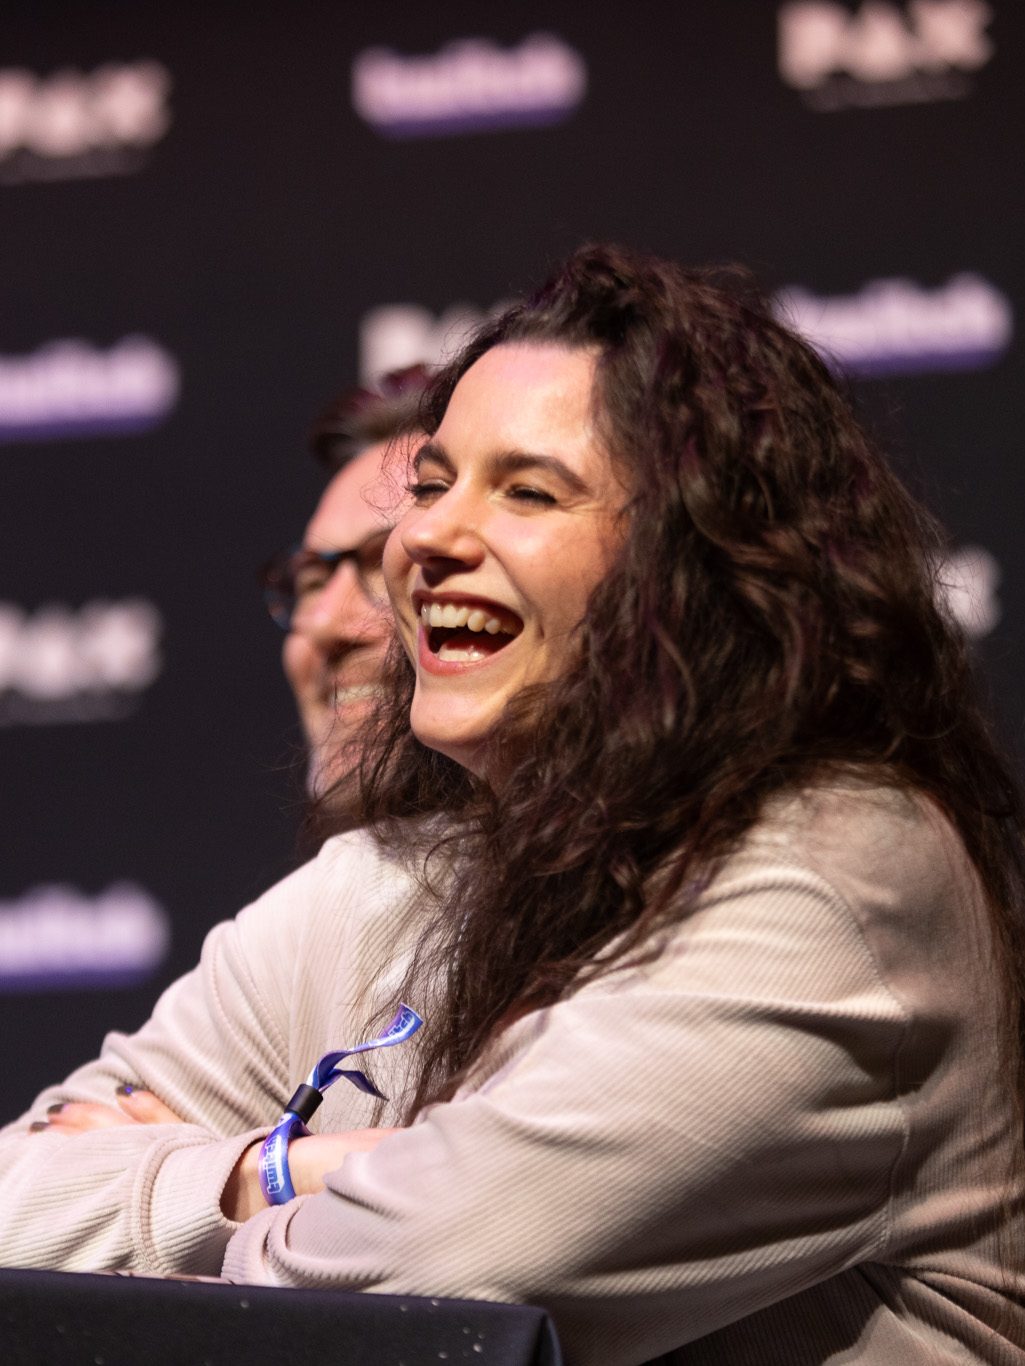 Female voice talent laughing joyfully at a panel at PAX Australia